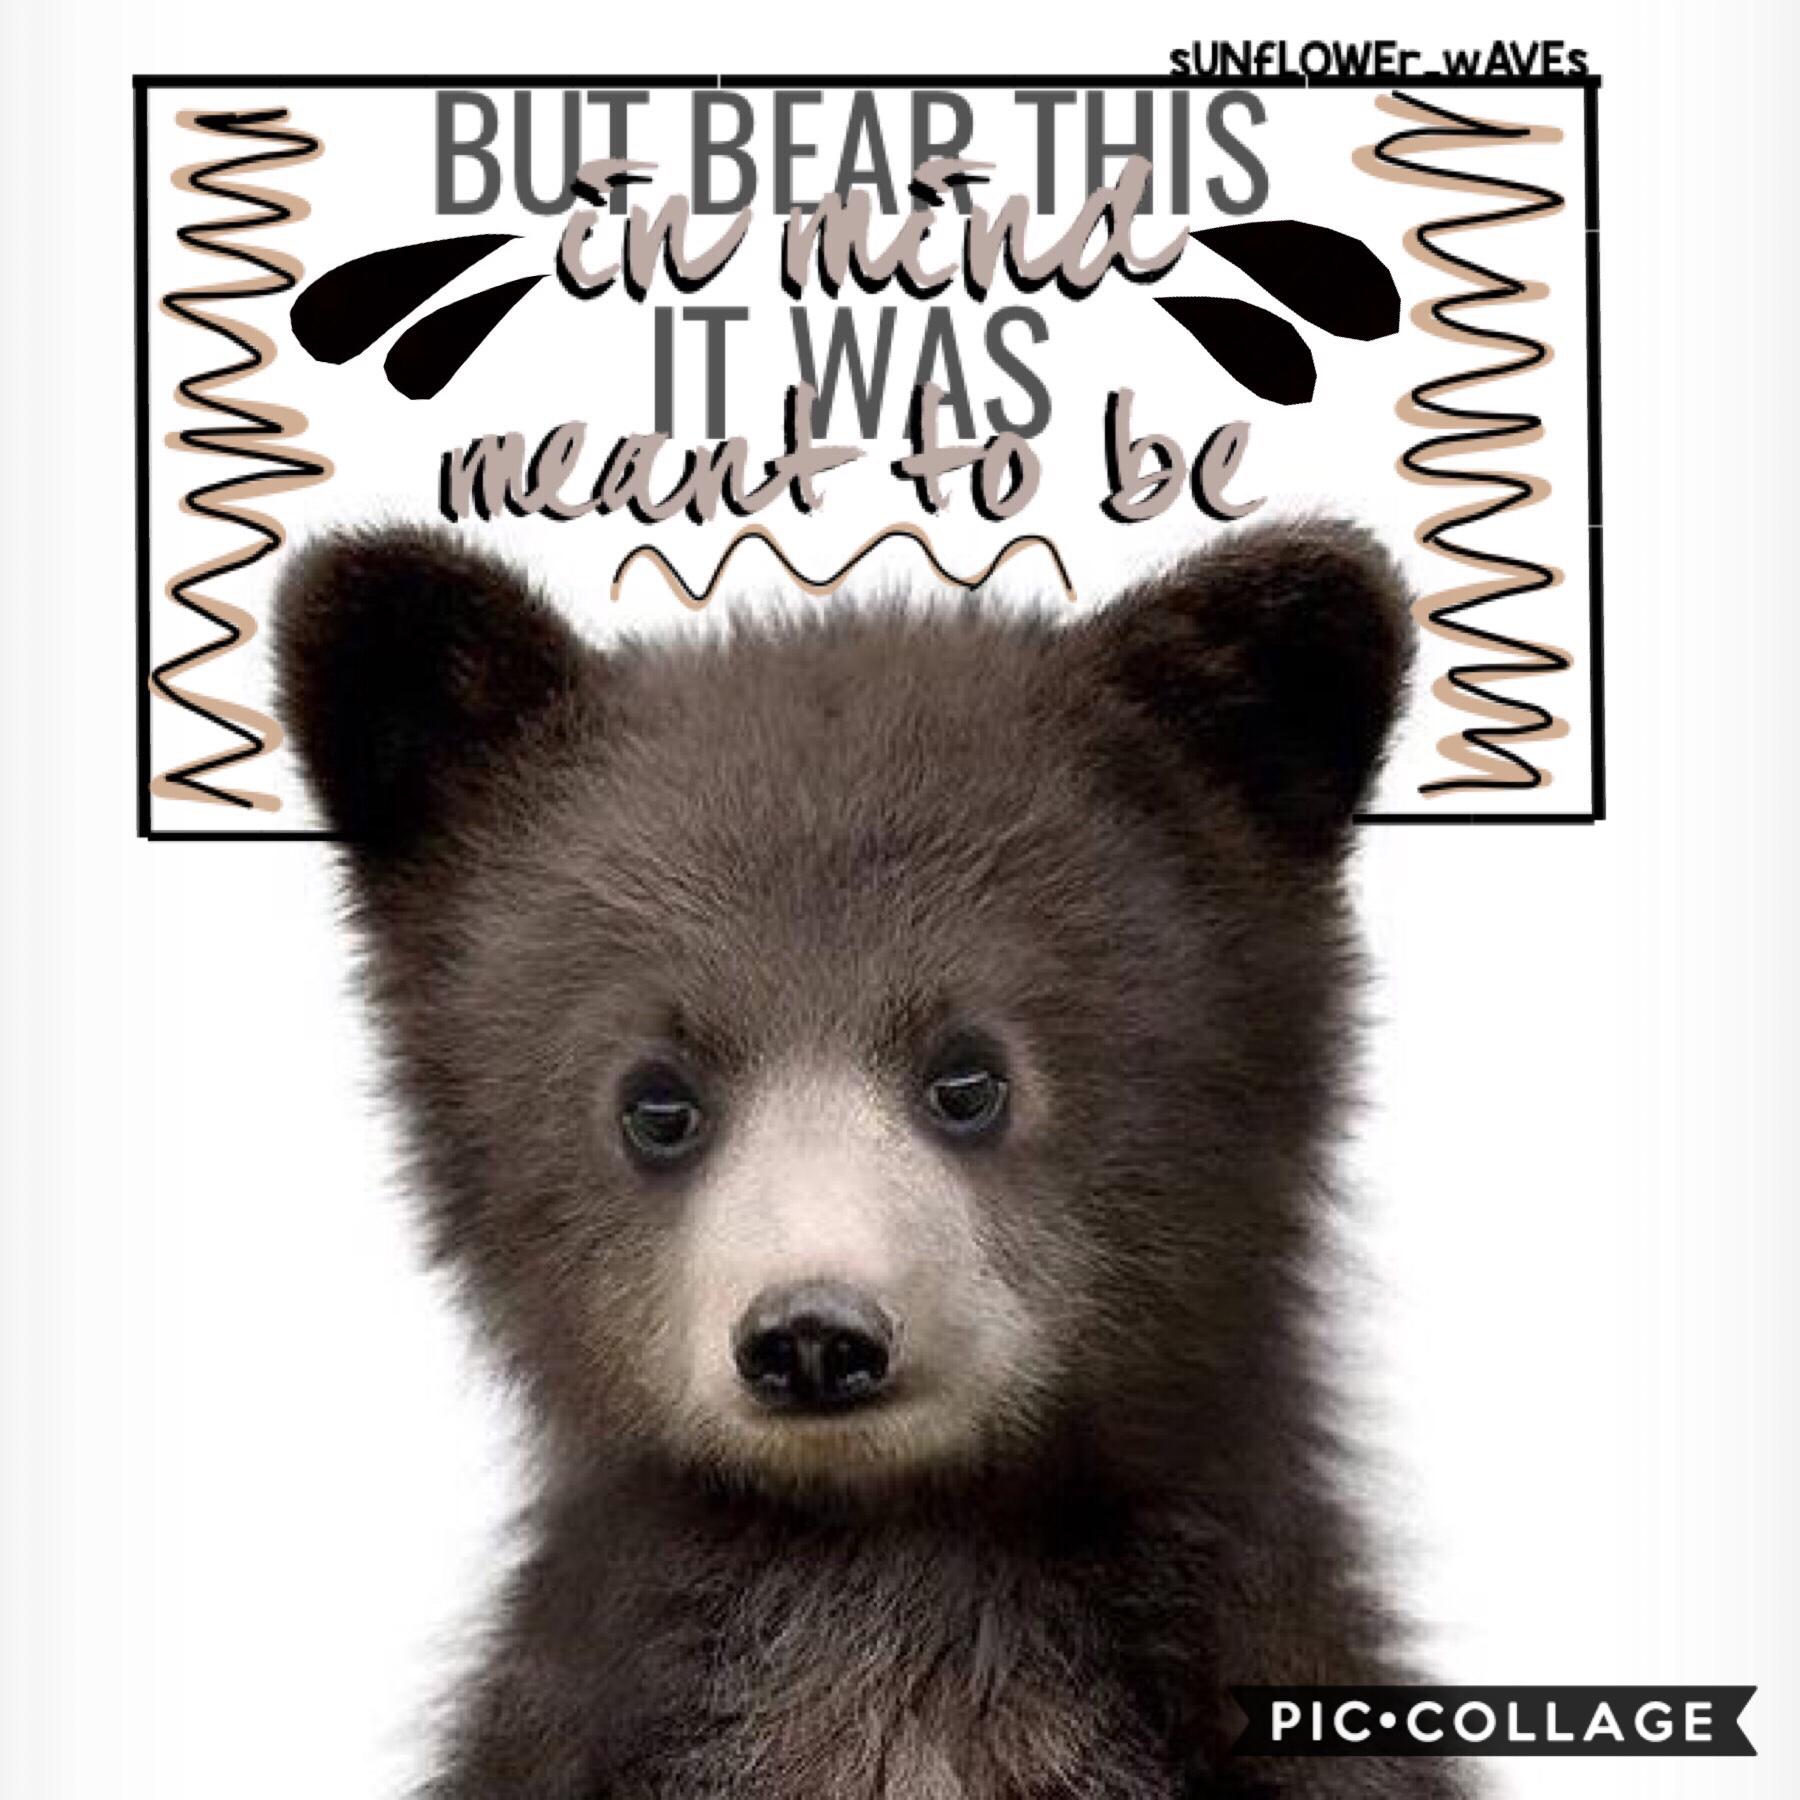 🐻tap🐻
[11/20/18]
so this is kinda simple but
✨Hru guys !?✨
QOTD: is it Thanksgiving break for y'all?
AOTD: sure is 🙂
💙Rate ?/100!
Feature!?😍
Have a blessed day 💓